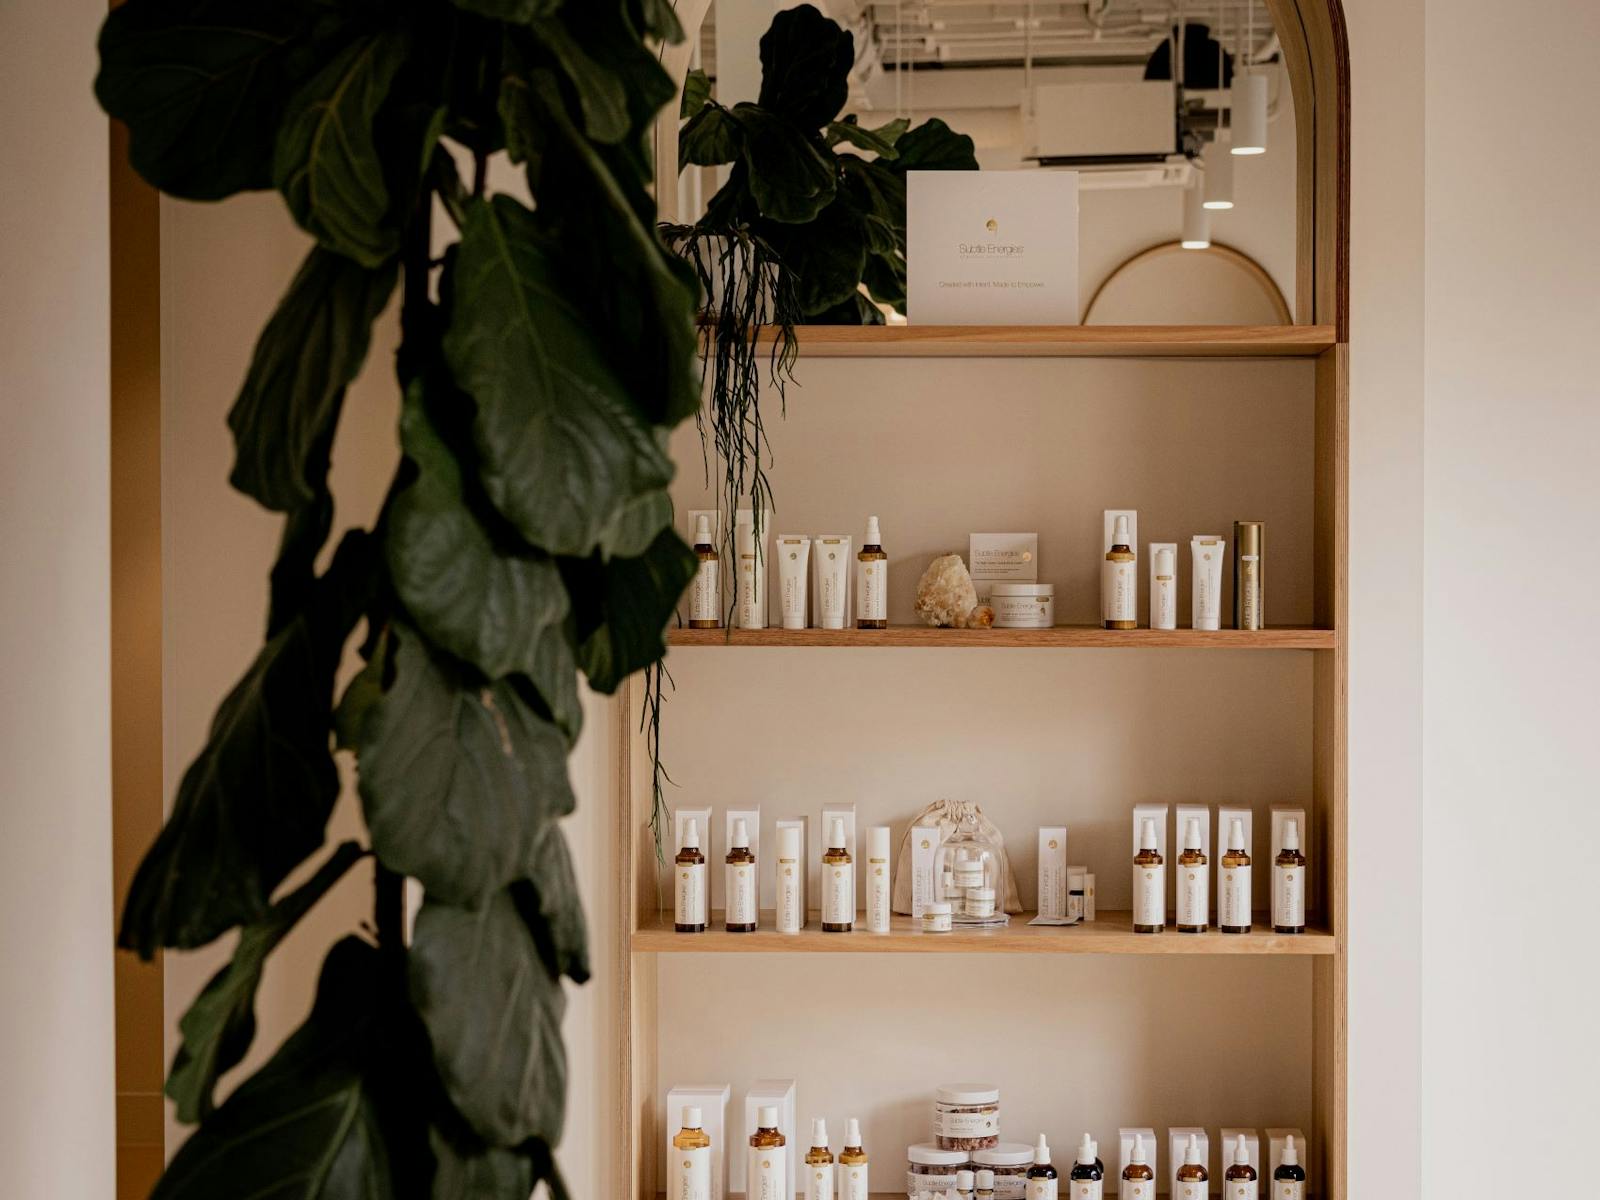 A range of products are available for purchase for skin, spa, and health